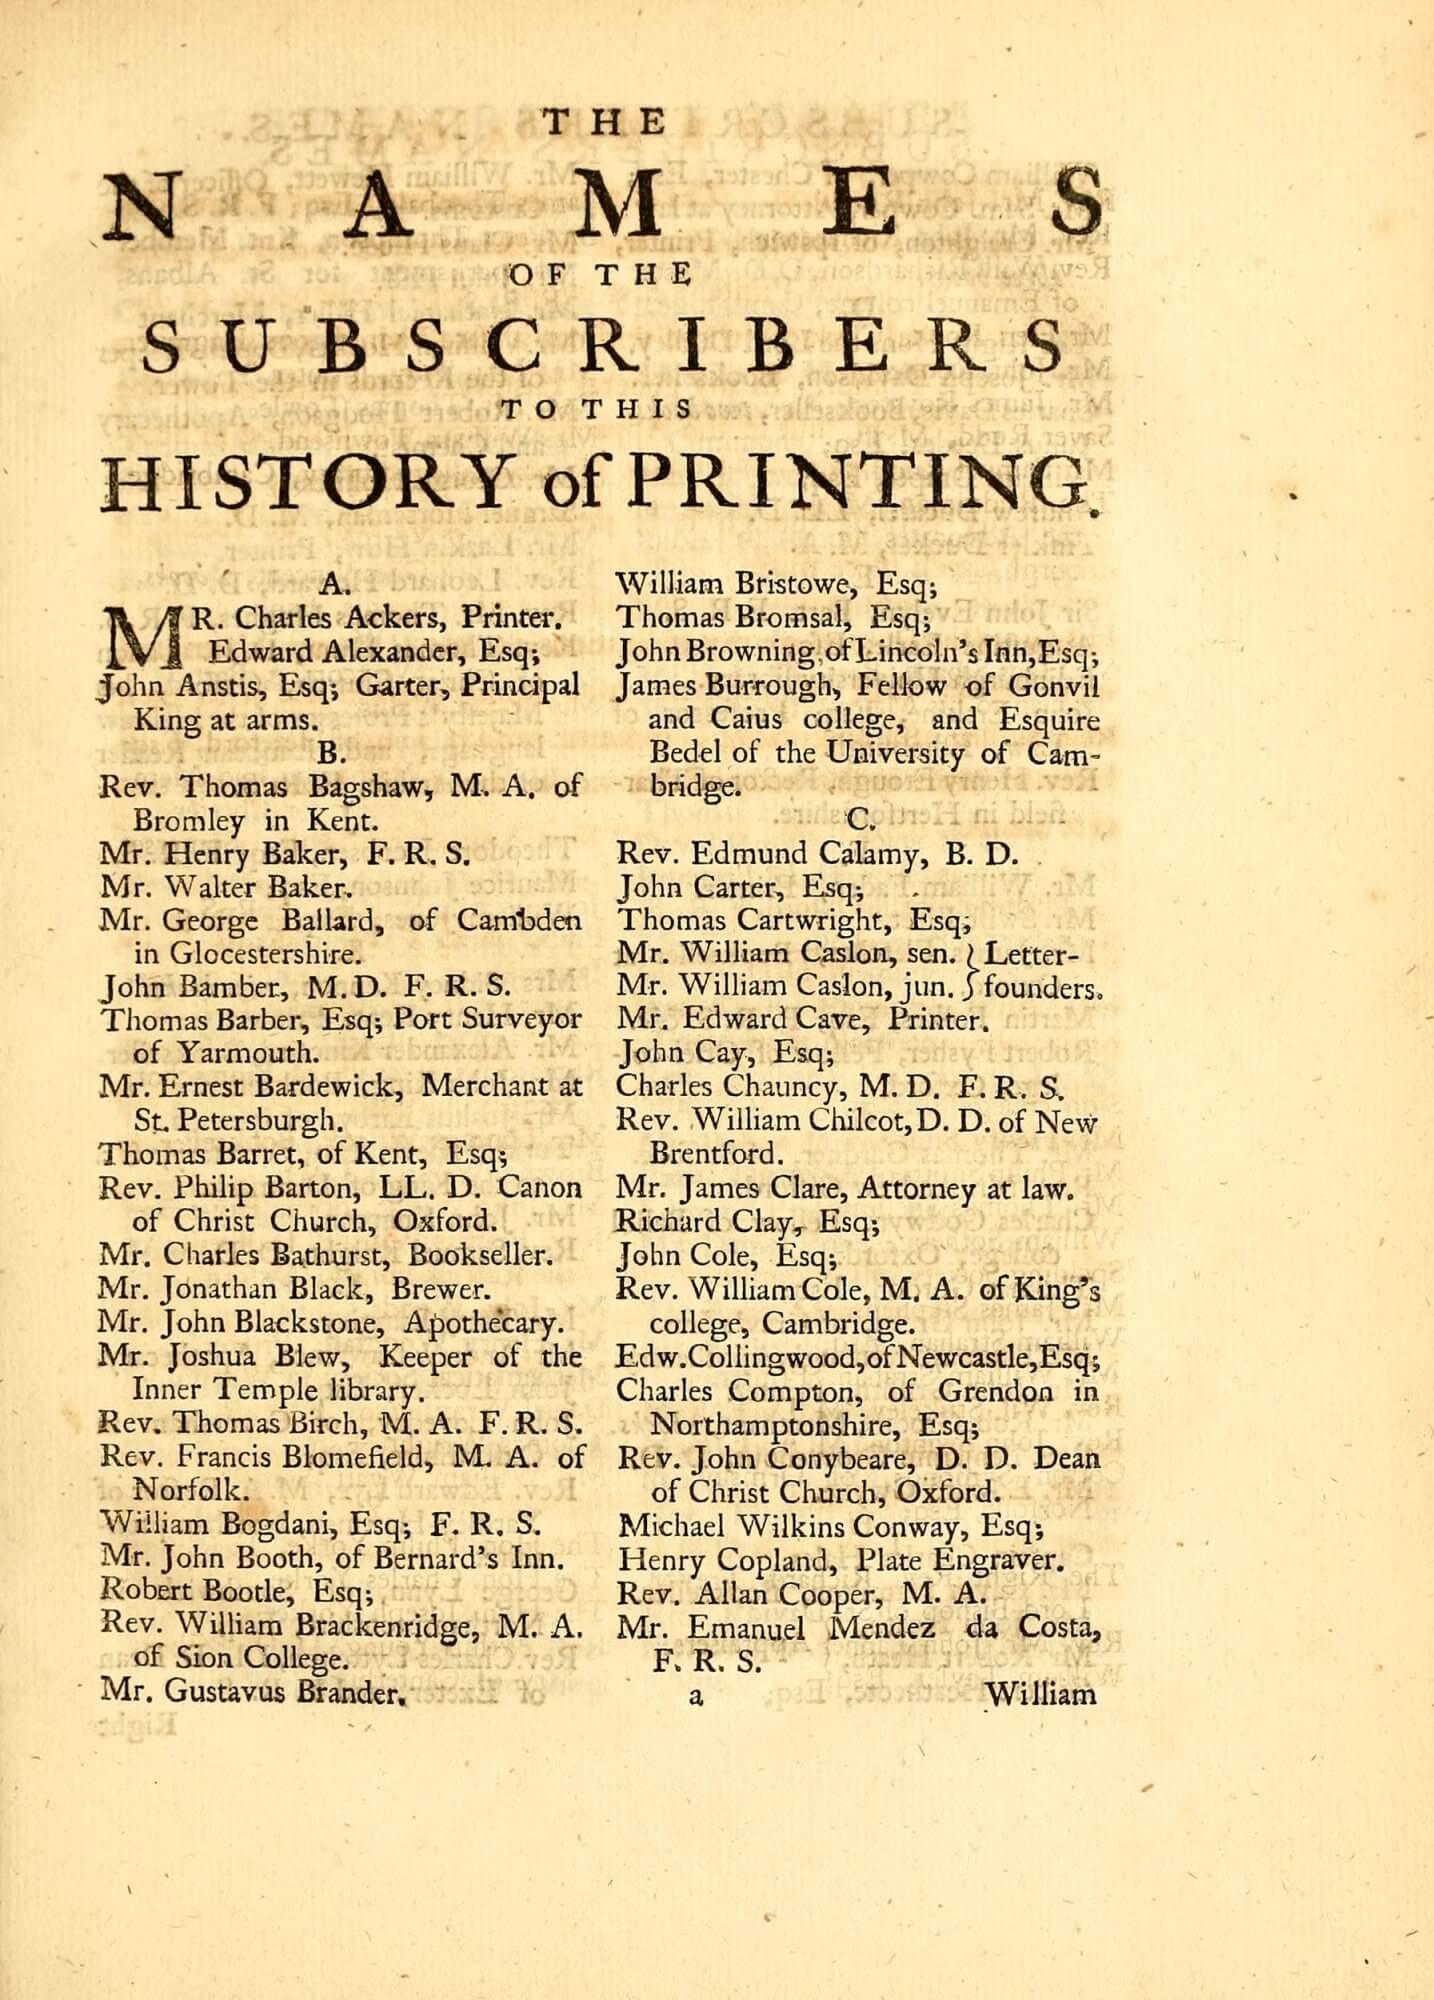 Appropriately for a book about the history of printing, this list of subscribers marks out the two Caslons as letter-founders.